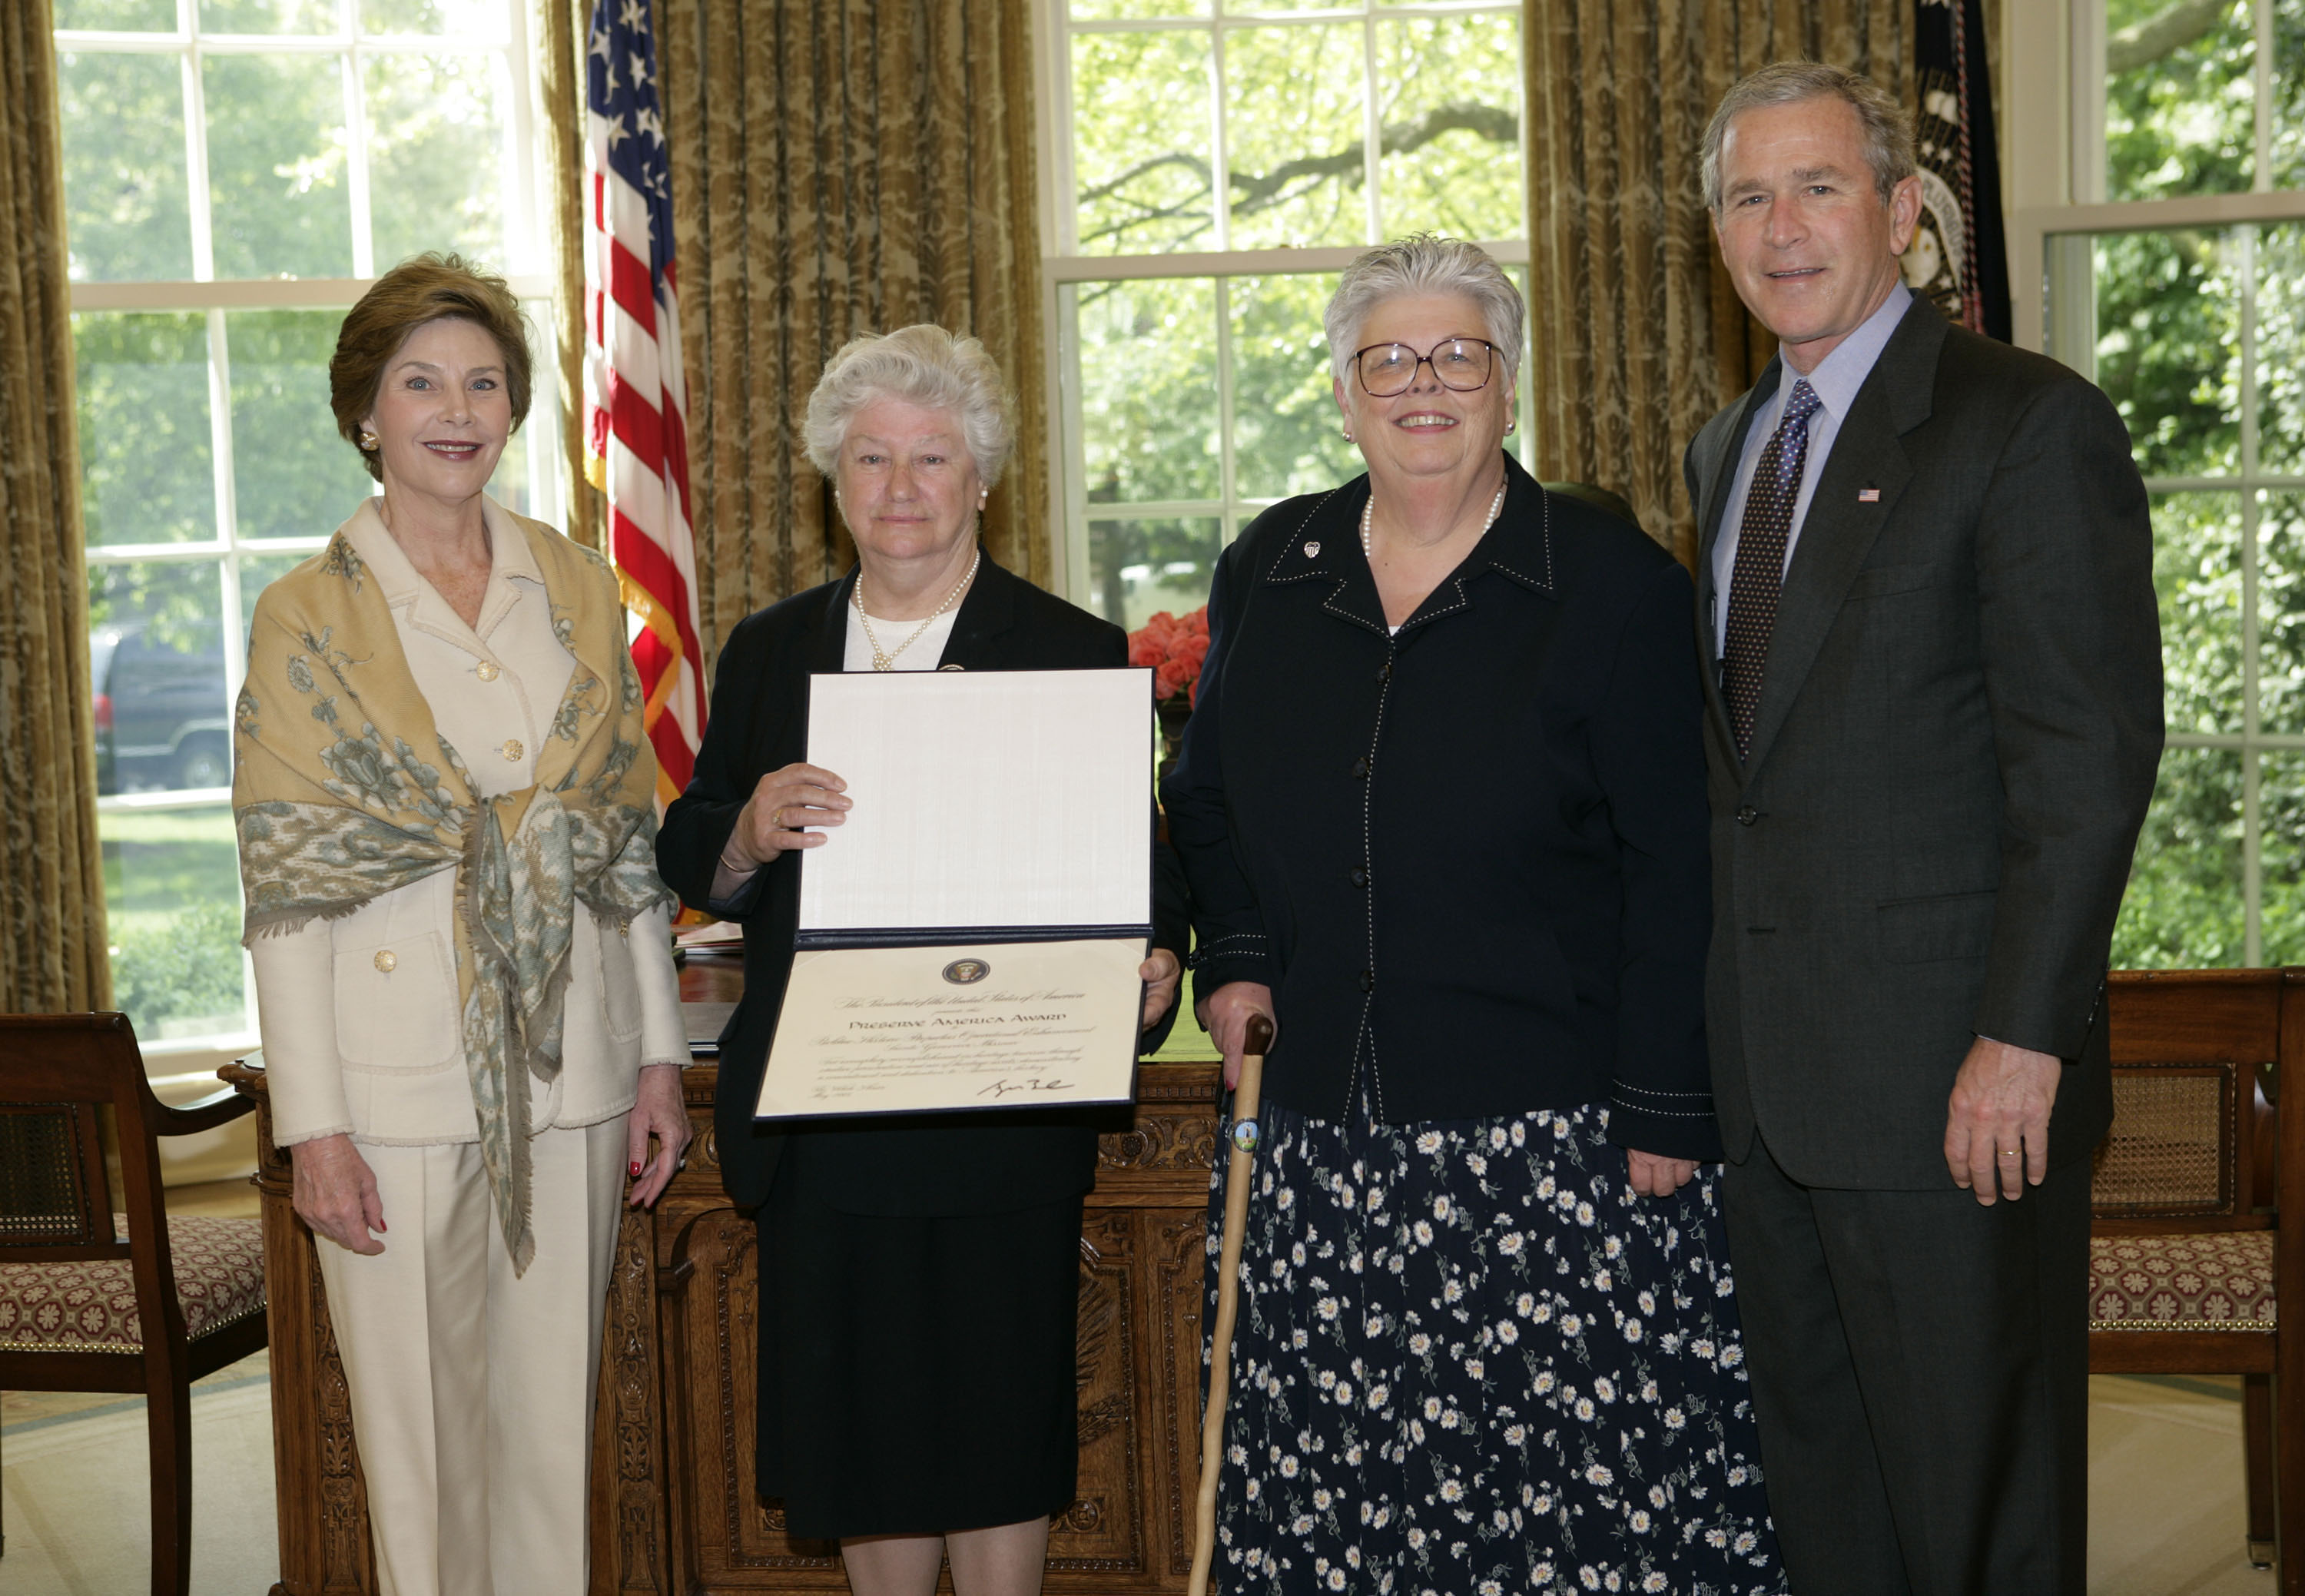 President George W. Bush and Laura Bush present the 2005 Preserve America Presidential Award to Agnes Chouteau, President, The National Society of the Colonial Dames of America, left, of St. Louis and Lorraine Stange, Director, Bolduc Historic Properties, of Sainte Genevieve, Missouri, in the Oval Office Monday, May 2, 2005.( White House photo by Eric Draper)